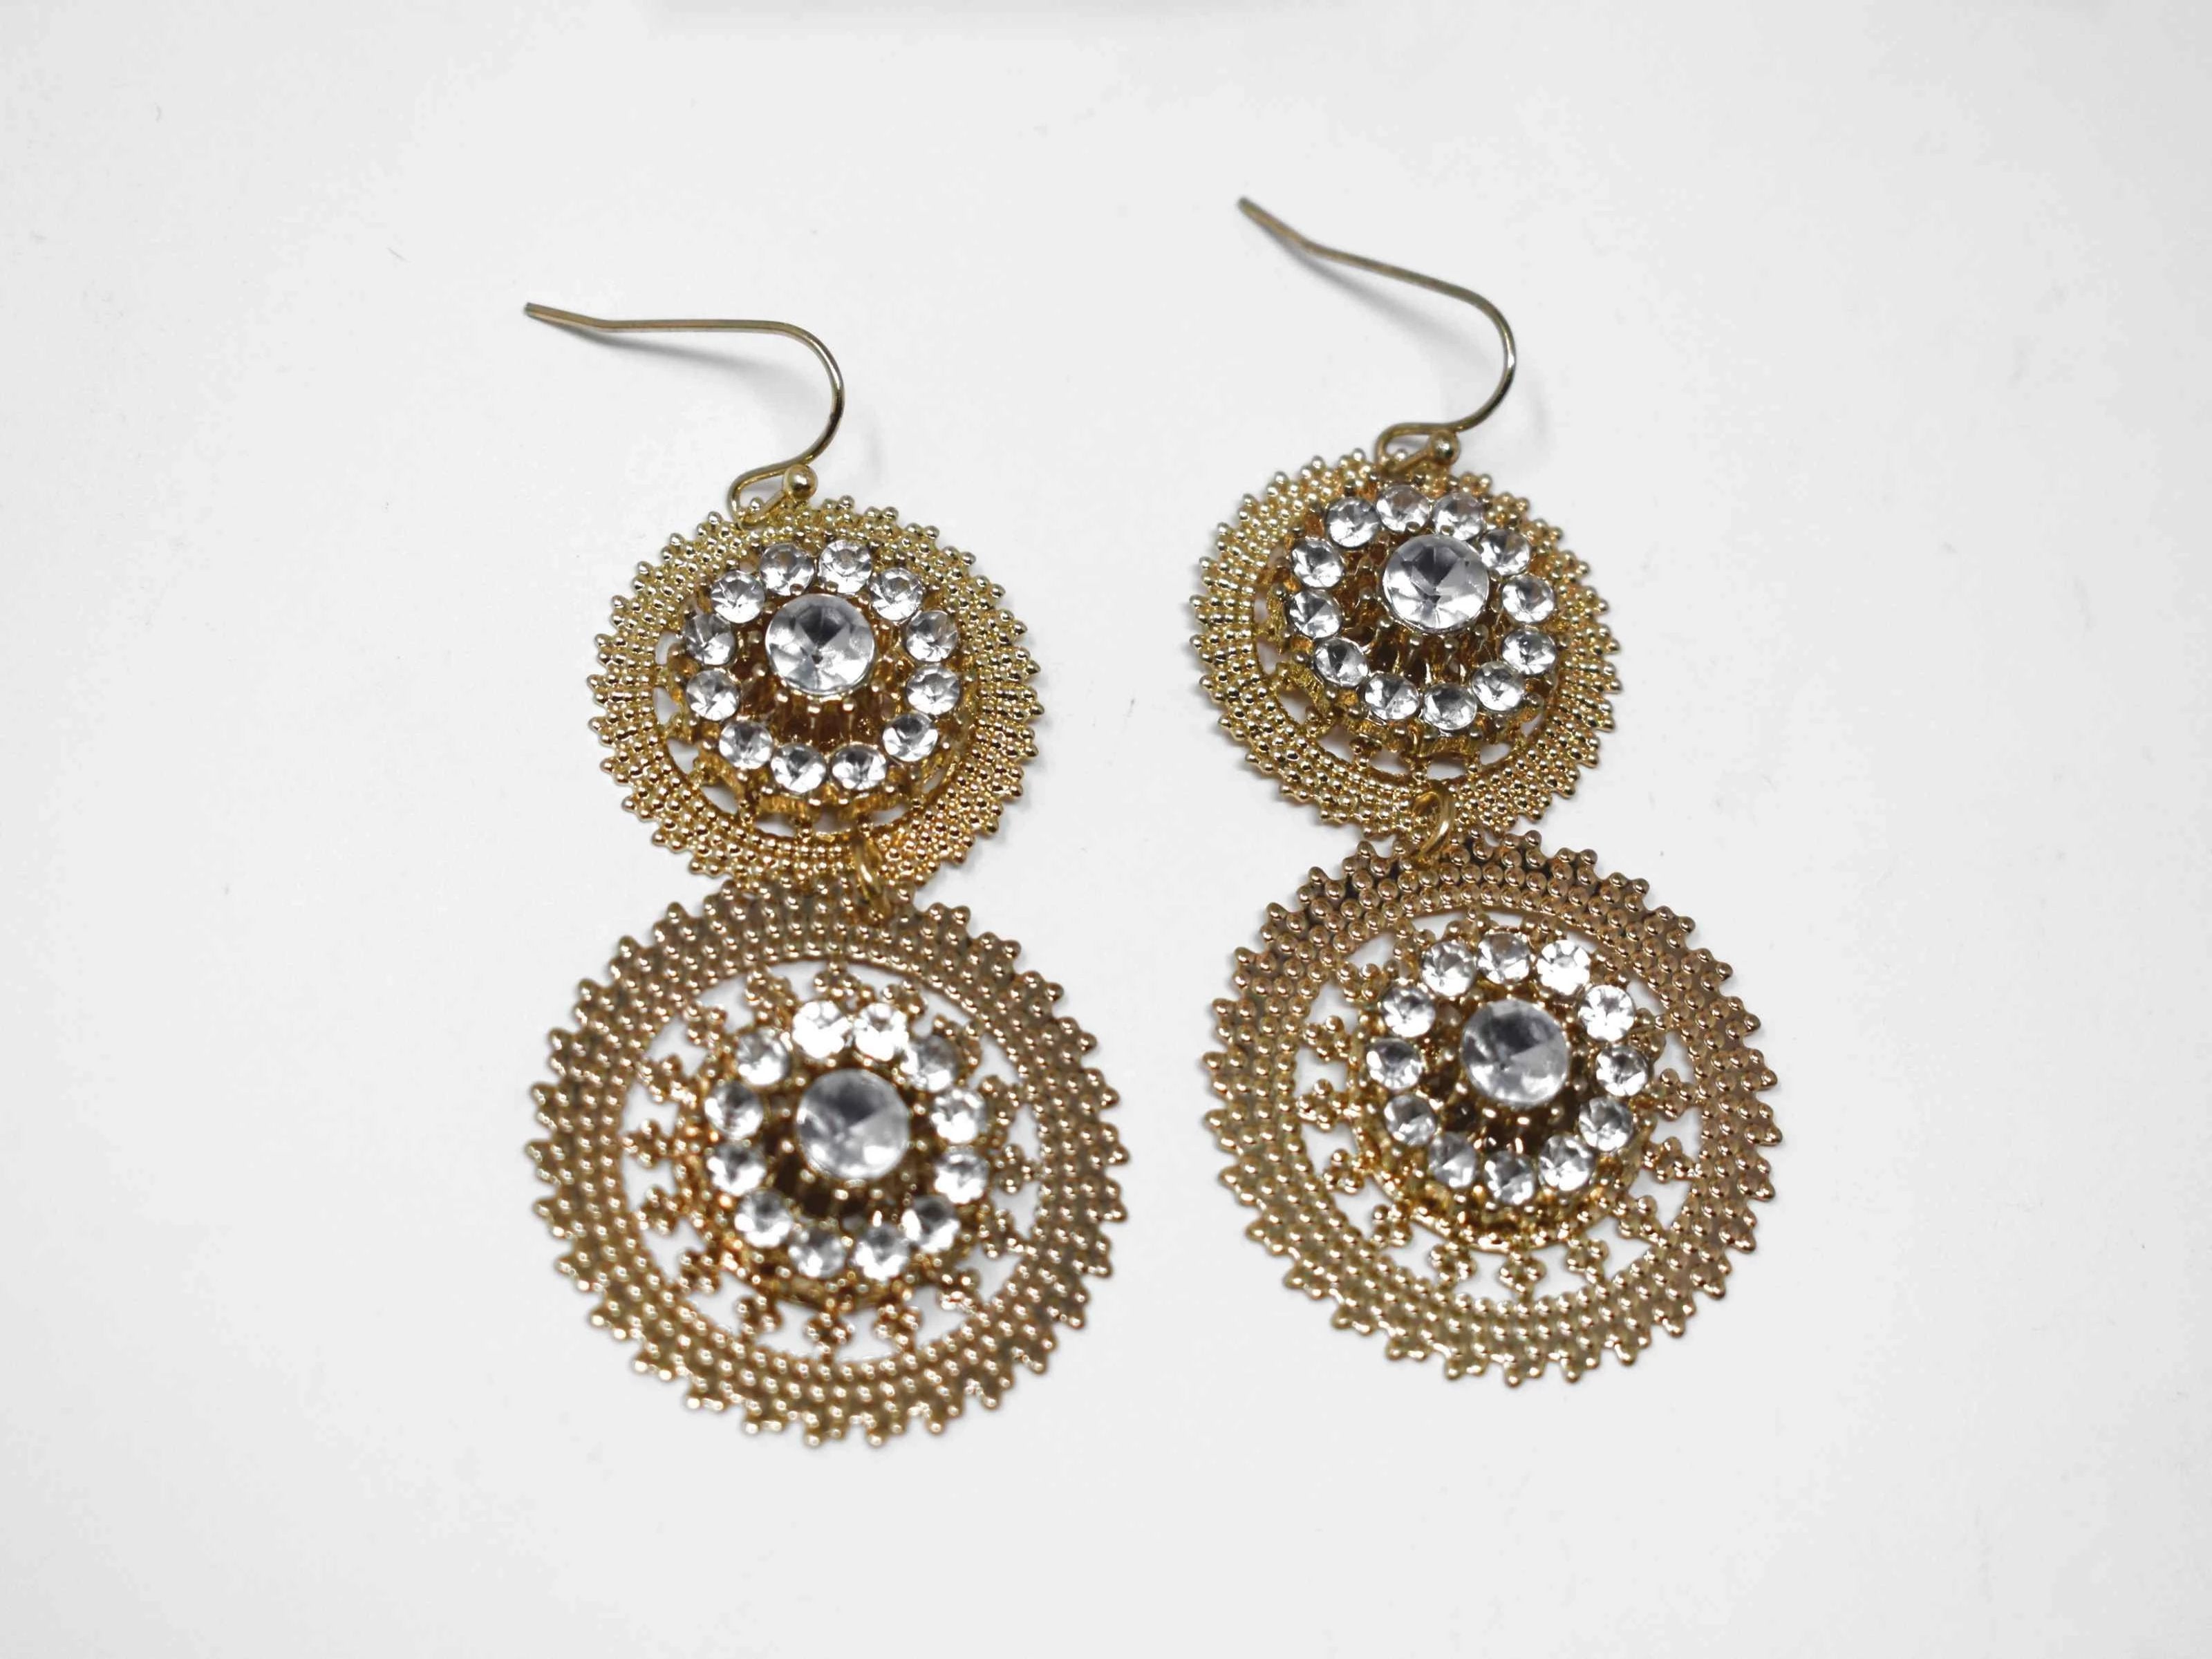 Our Aster is a chic gold tone drop dangle style earring accented with clear stones. It measures around 2 1/2" in length.